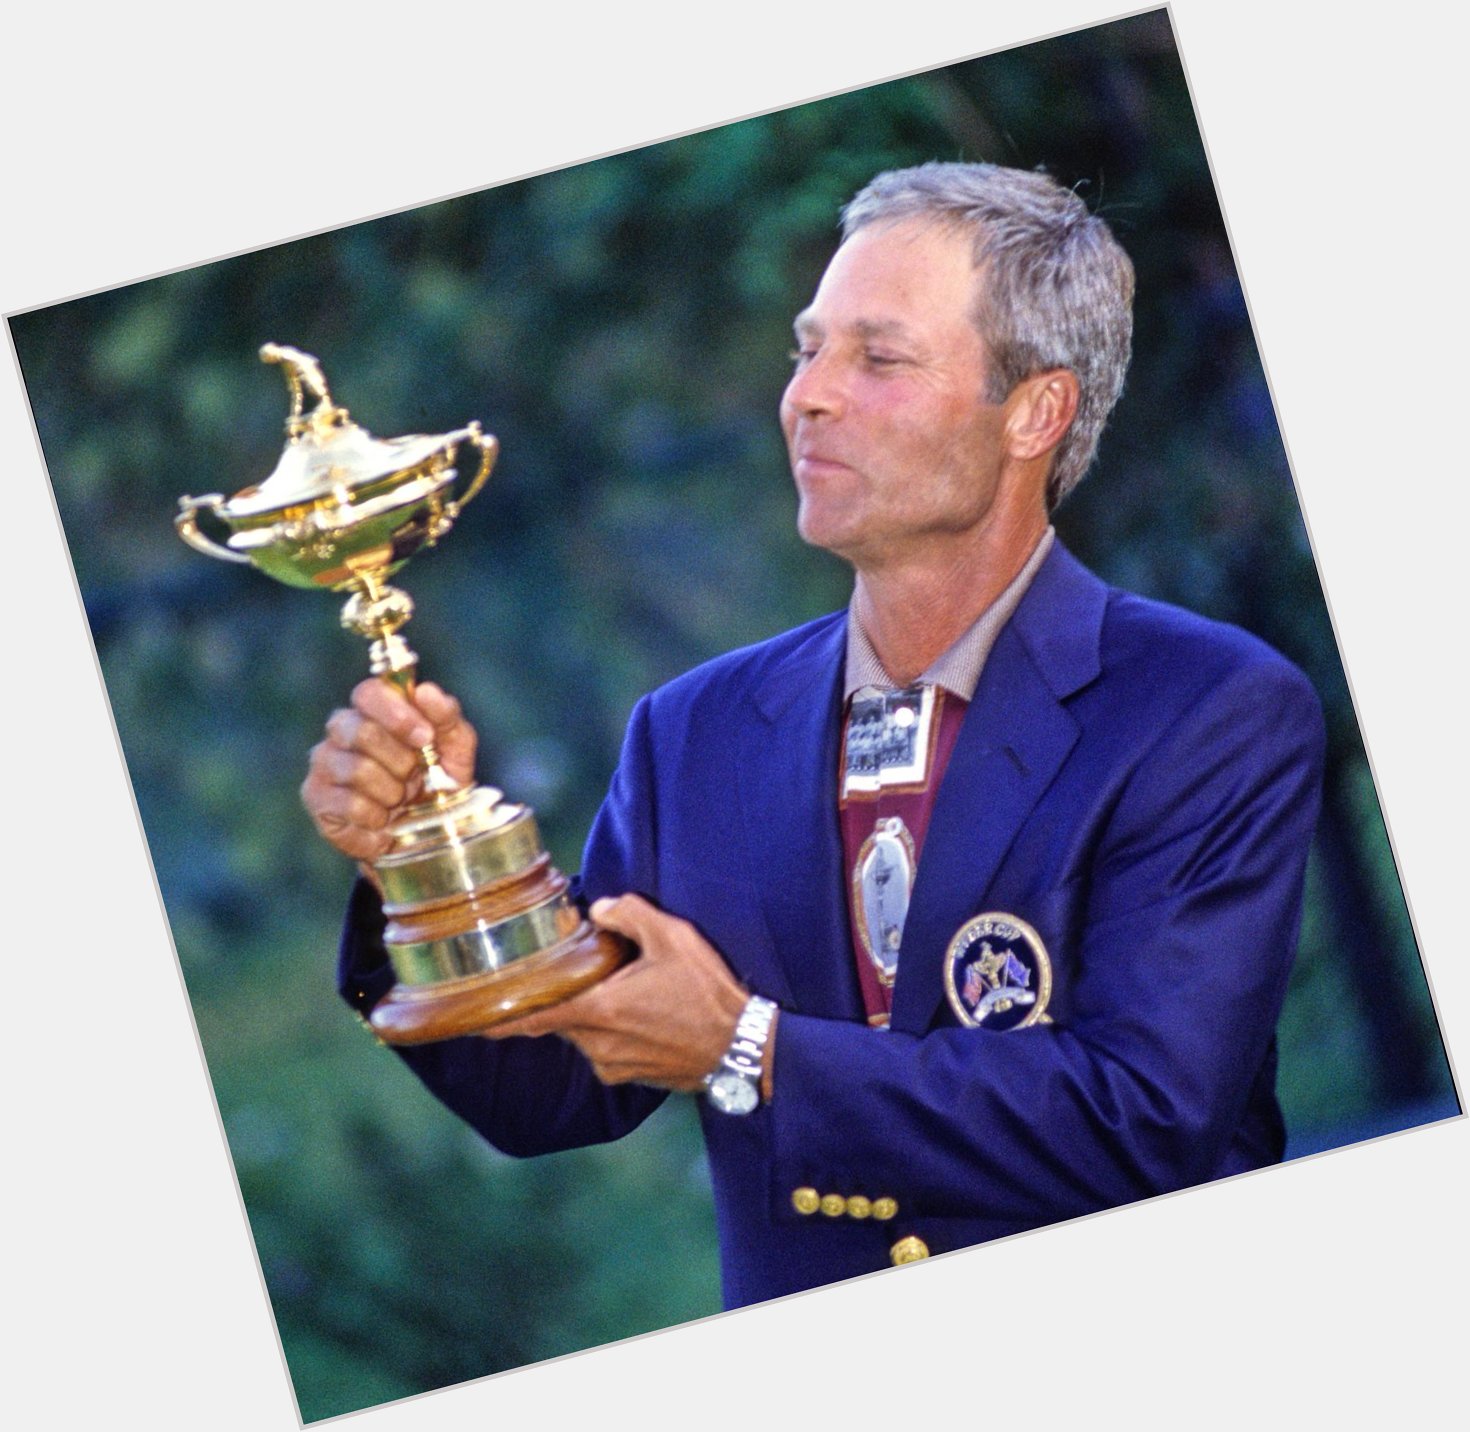 PGAcom: Join us in wishing a very happy 65th birthday to 1999 Ryder Cup captain Ben Crenshaw  